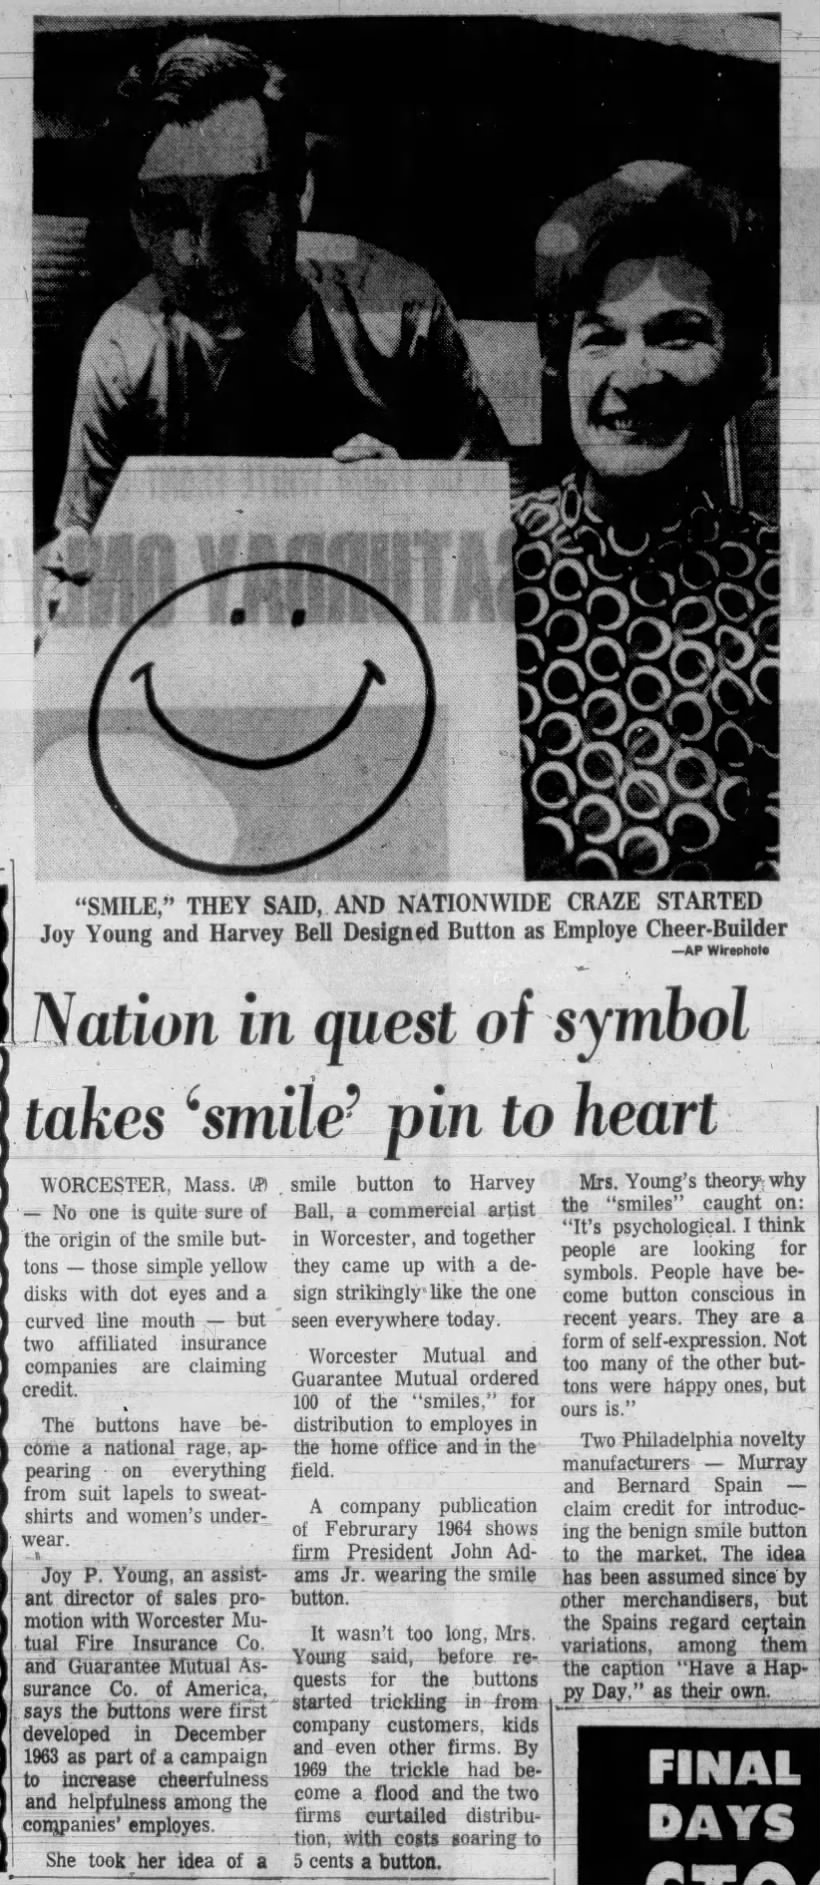 Nation in quest of symbol takes 'smile' pin to heart